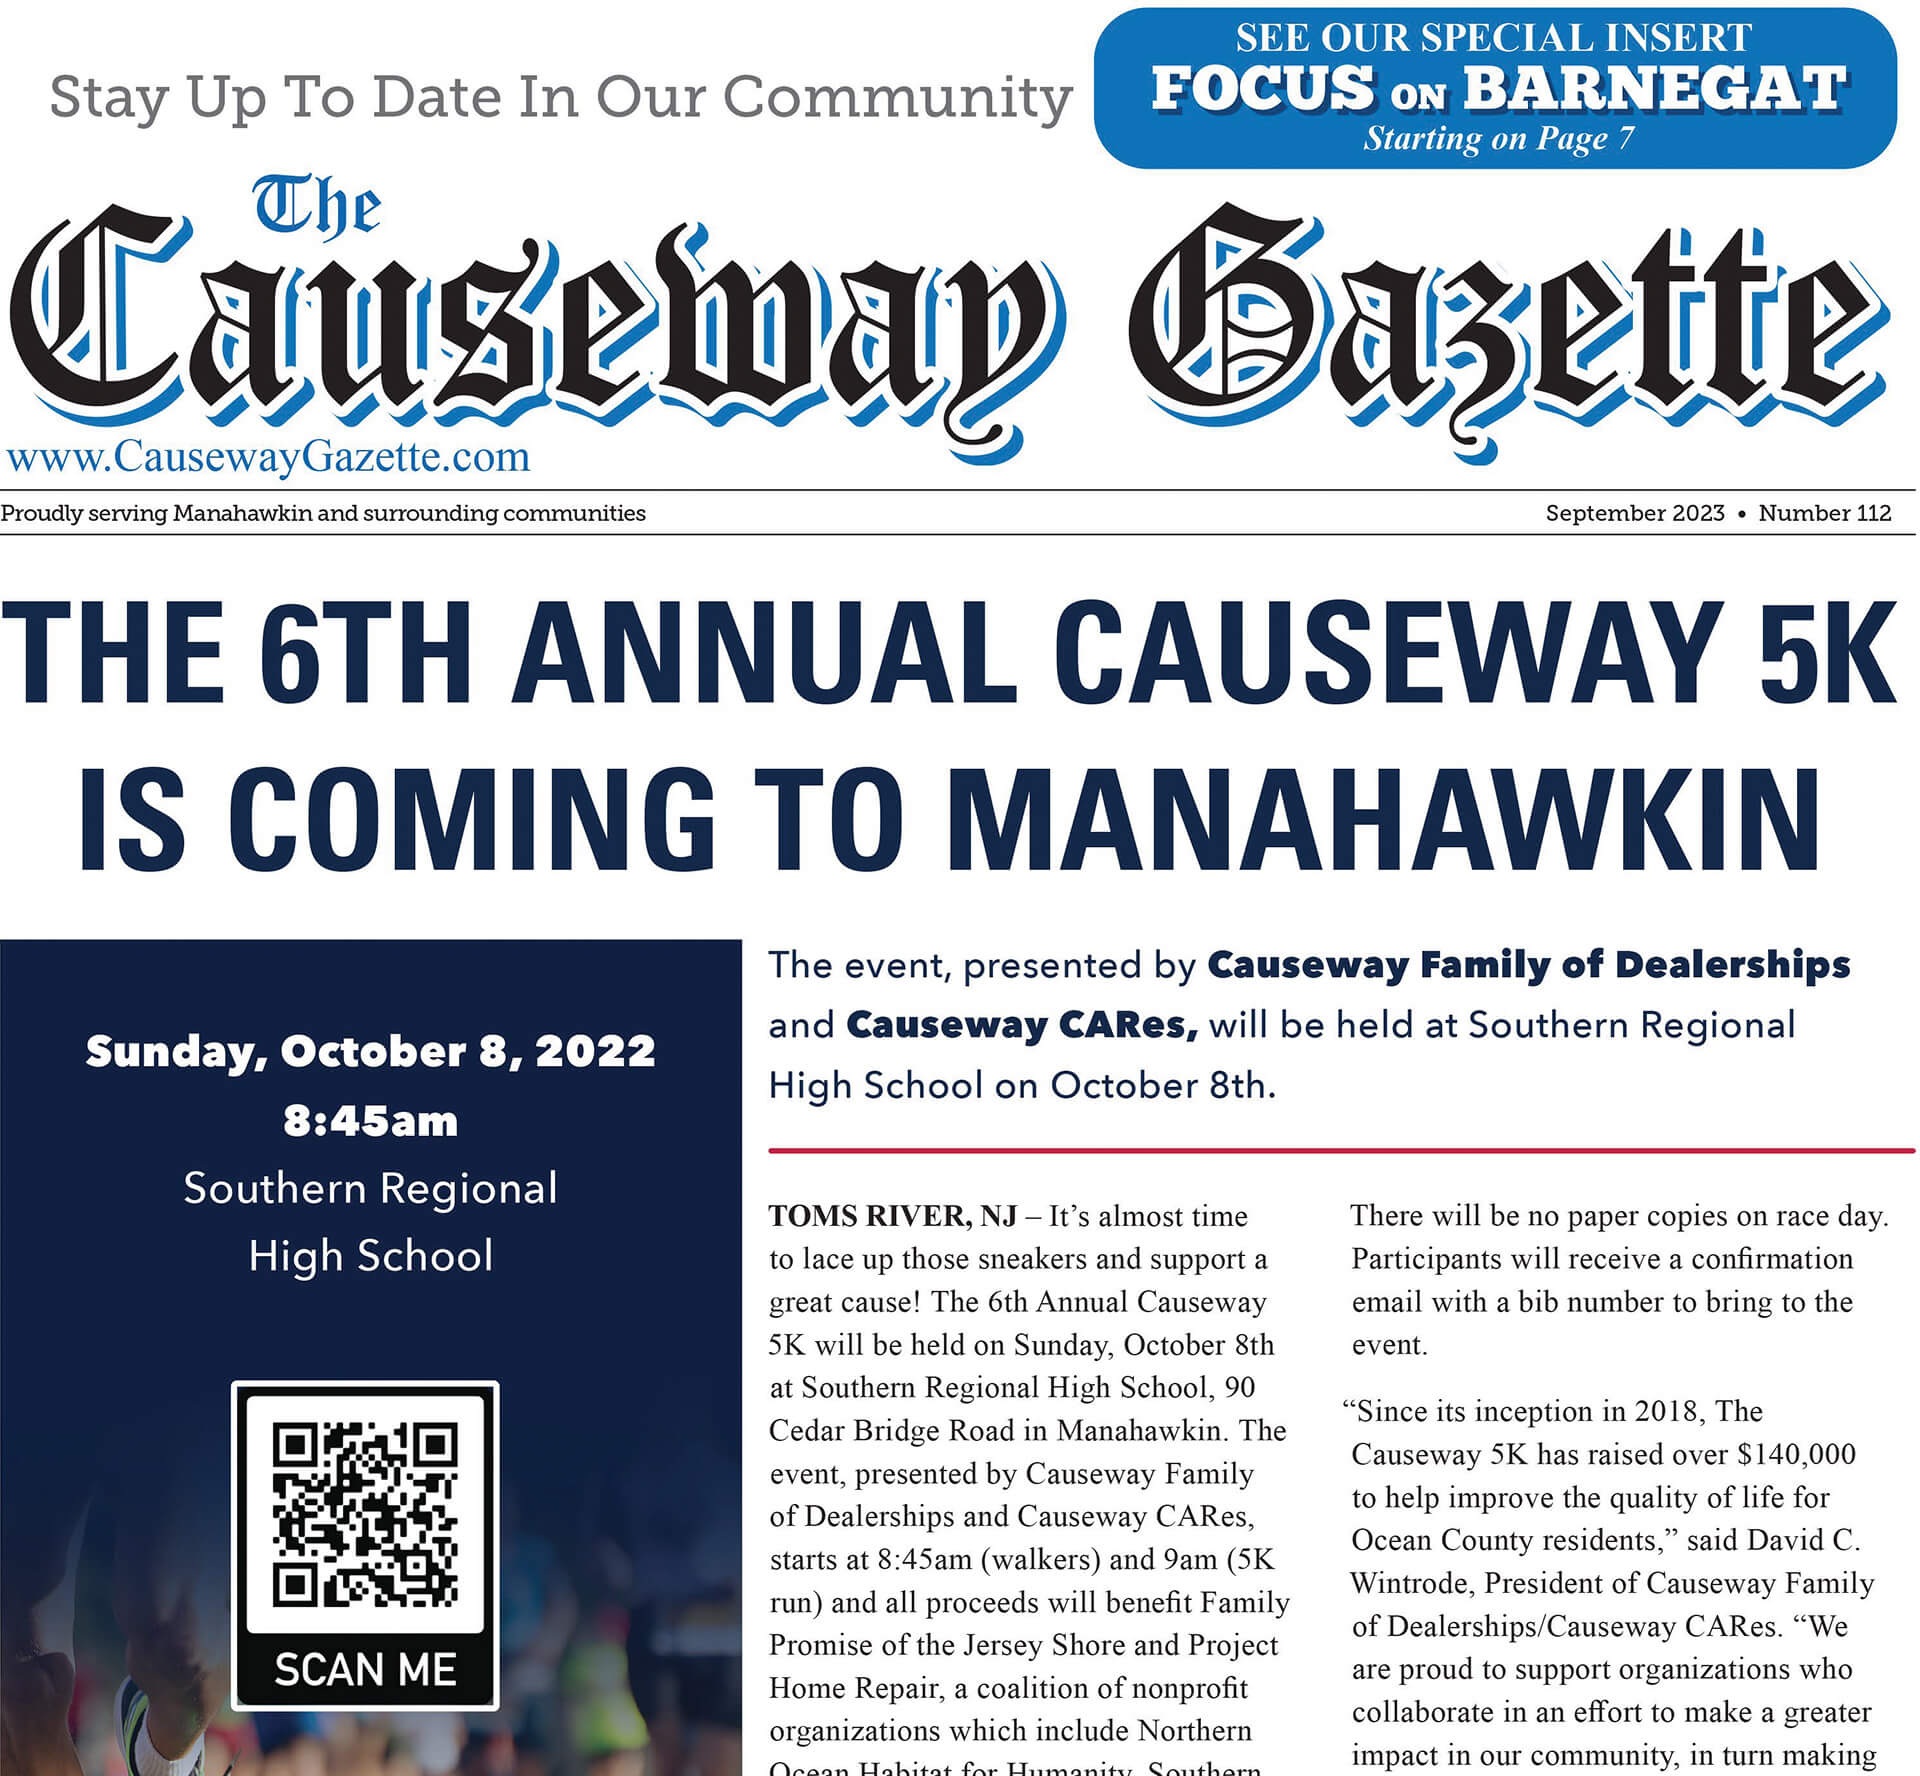 The 6th Annual Causeway 5K is coming to Manahawkin